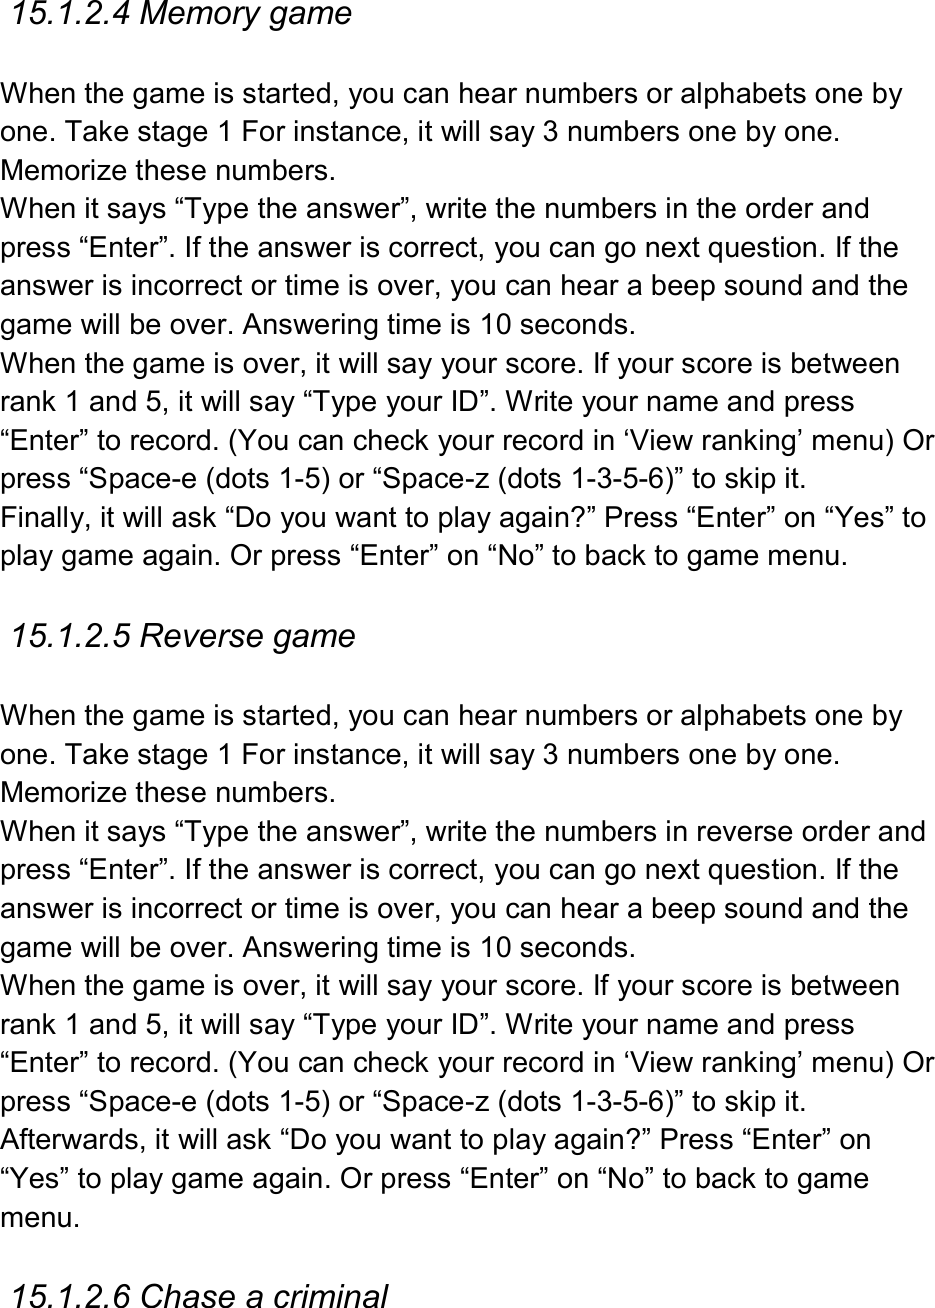  15.1.2.4 Memory game  When the game is started, you can hear numbers or alphabets one by one. Take stage 1 For instance, it will say 3 numbers one by one. Memorize these numbers. When it says “Type the answer”, write the numbers in the order and press “Enter”. If the answer is correct, you can go next question. If the answer is incorrect or time is over, you can hear a beep sound and the game will be over. Answering time is 10 seconds.   When the game is over, it will say your score. If your score is between rank 1 and 5, it will say “Type your ID”. Write your name and press “Enter” to record. (You can check your record in ‘View ranking’ menu) Or press “Space-e (dots 1-5) or “Space-z (dots 1-3-5-6)” to skip it. Finally, it will ask “Do you want to play again?” Press “Enter” on “Yes” to play game again. Or press “Enter” on “No” to back to game menu.  15.1.2.5 Reverse game  When the game is started, you can hear numbers or alphabets one by one. Take stage 1 For instance, it will say 3 numbers one by one. Memorize these numbers.   When it says “Type the answer”, write the numbers in reverse order and press “Enter”. If the answer is correct, you can go next question. If the answer is incorrect or time is over, you can hear a beep sound and the game will be over. Answering time is 10 seconds.   When the game is over, it will say your score. If your score is between rank 1 and 5, it will say “Type your ID”. Write your name and press “Enter” to record. (You can check your record in ‘View ranking’ menu) Or press “Space-e (dots 1-5) or “Space-z (dots 1-3-5-6)” to skip it. Afterwards, it will ask “Do you want to play again?” Press “Enter” on “Yes” to play game again. Or press “Enter” on “No” to back to game menu.  15.1.2.6 Chase a criminal  